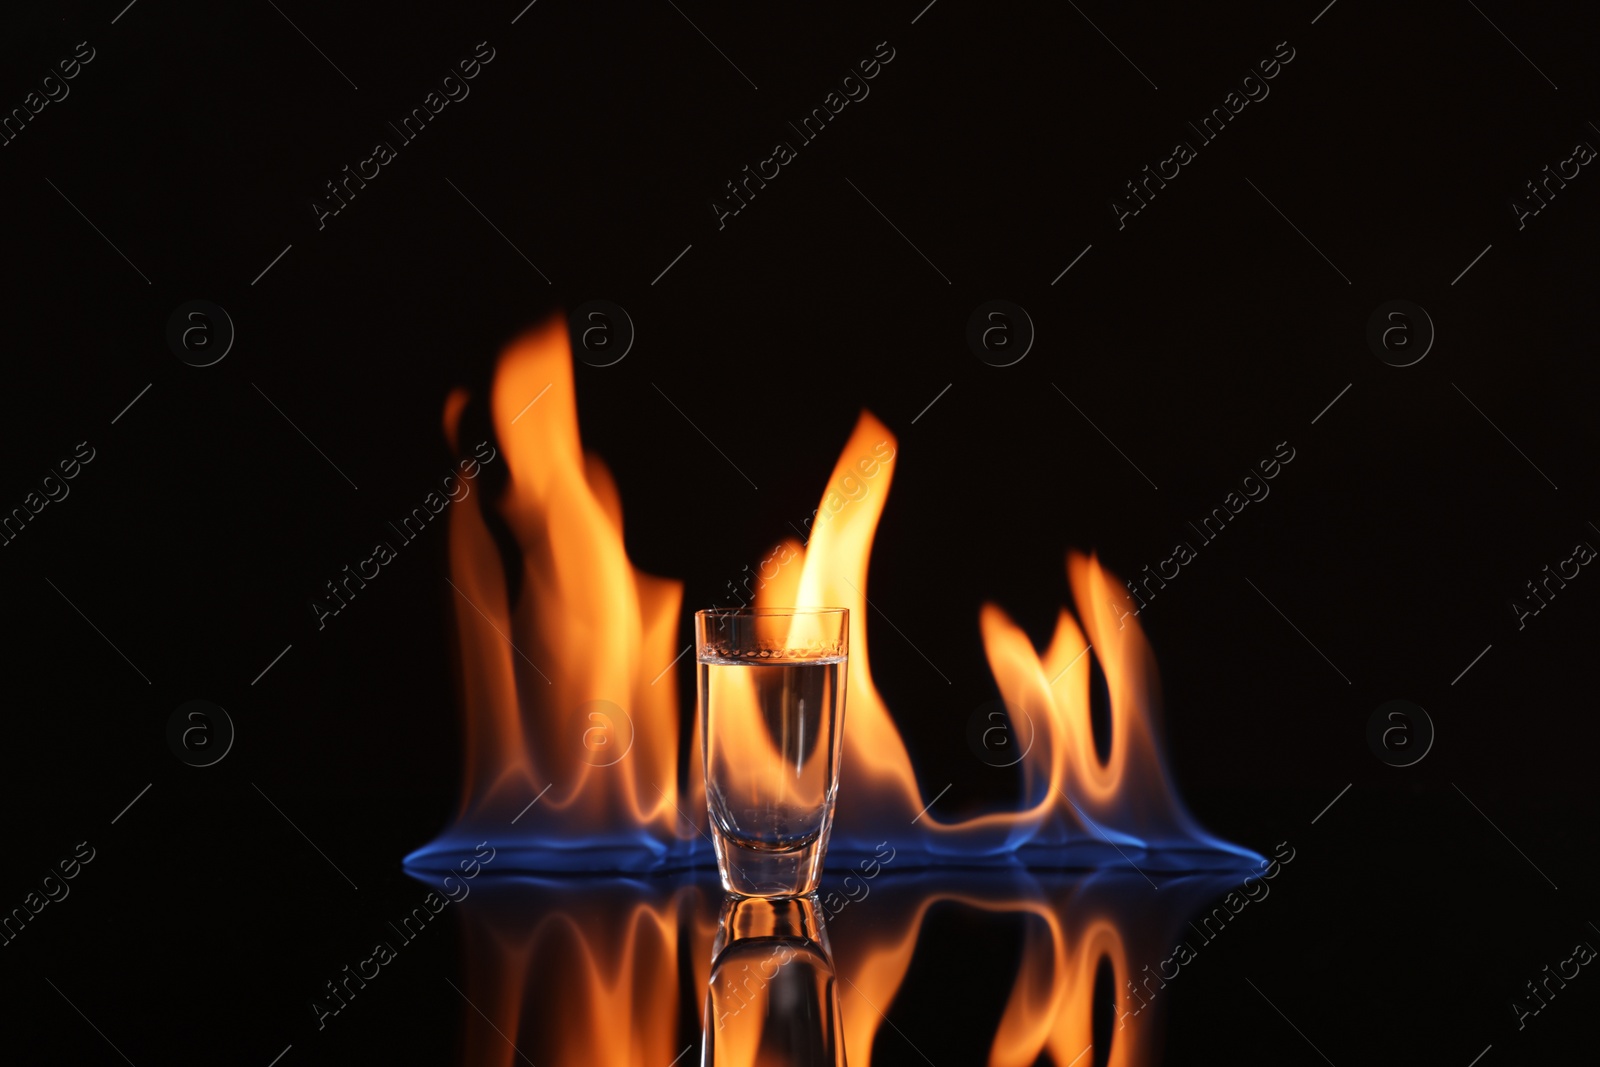 Photo of Vodka in shot glass and flame on black background